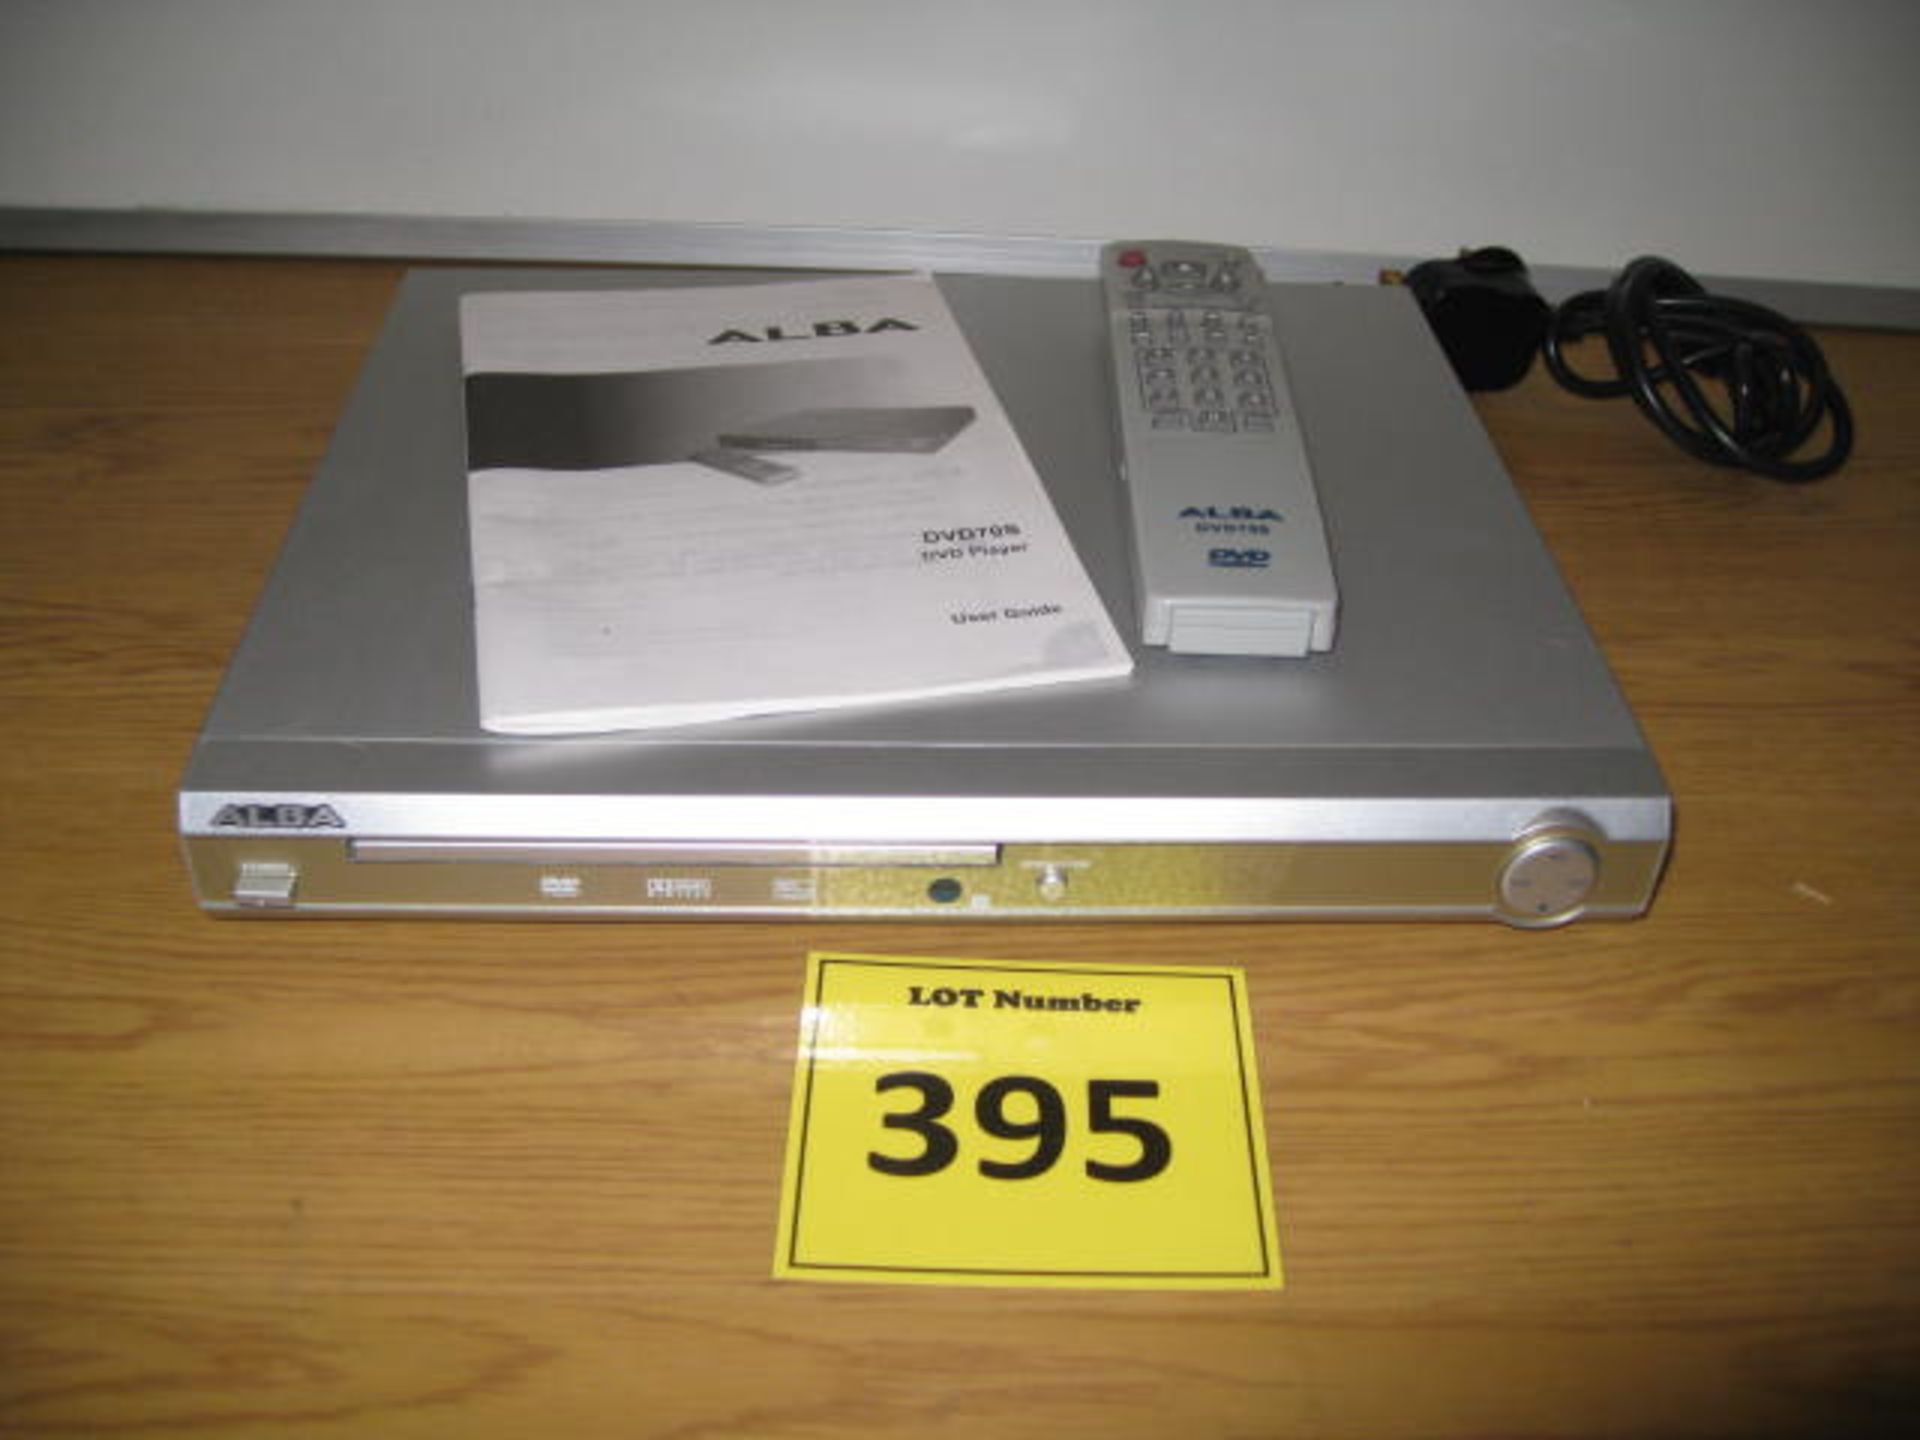 ALBA DVD70S DVD PLAYER WITHUSER GUIDE AND REMOTE CONTROL